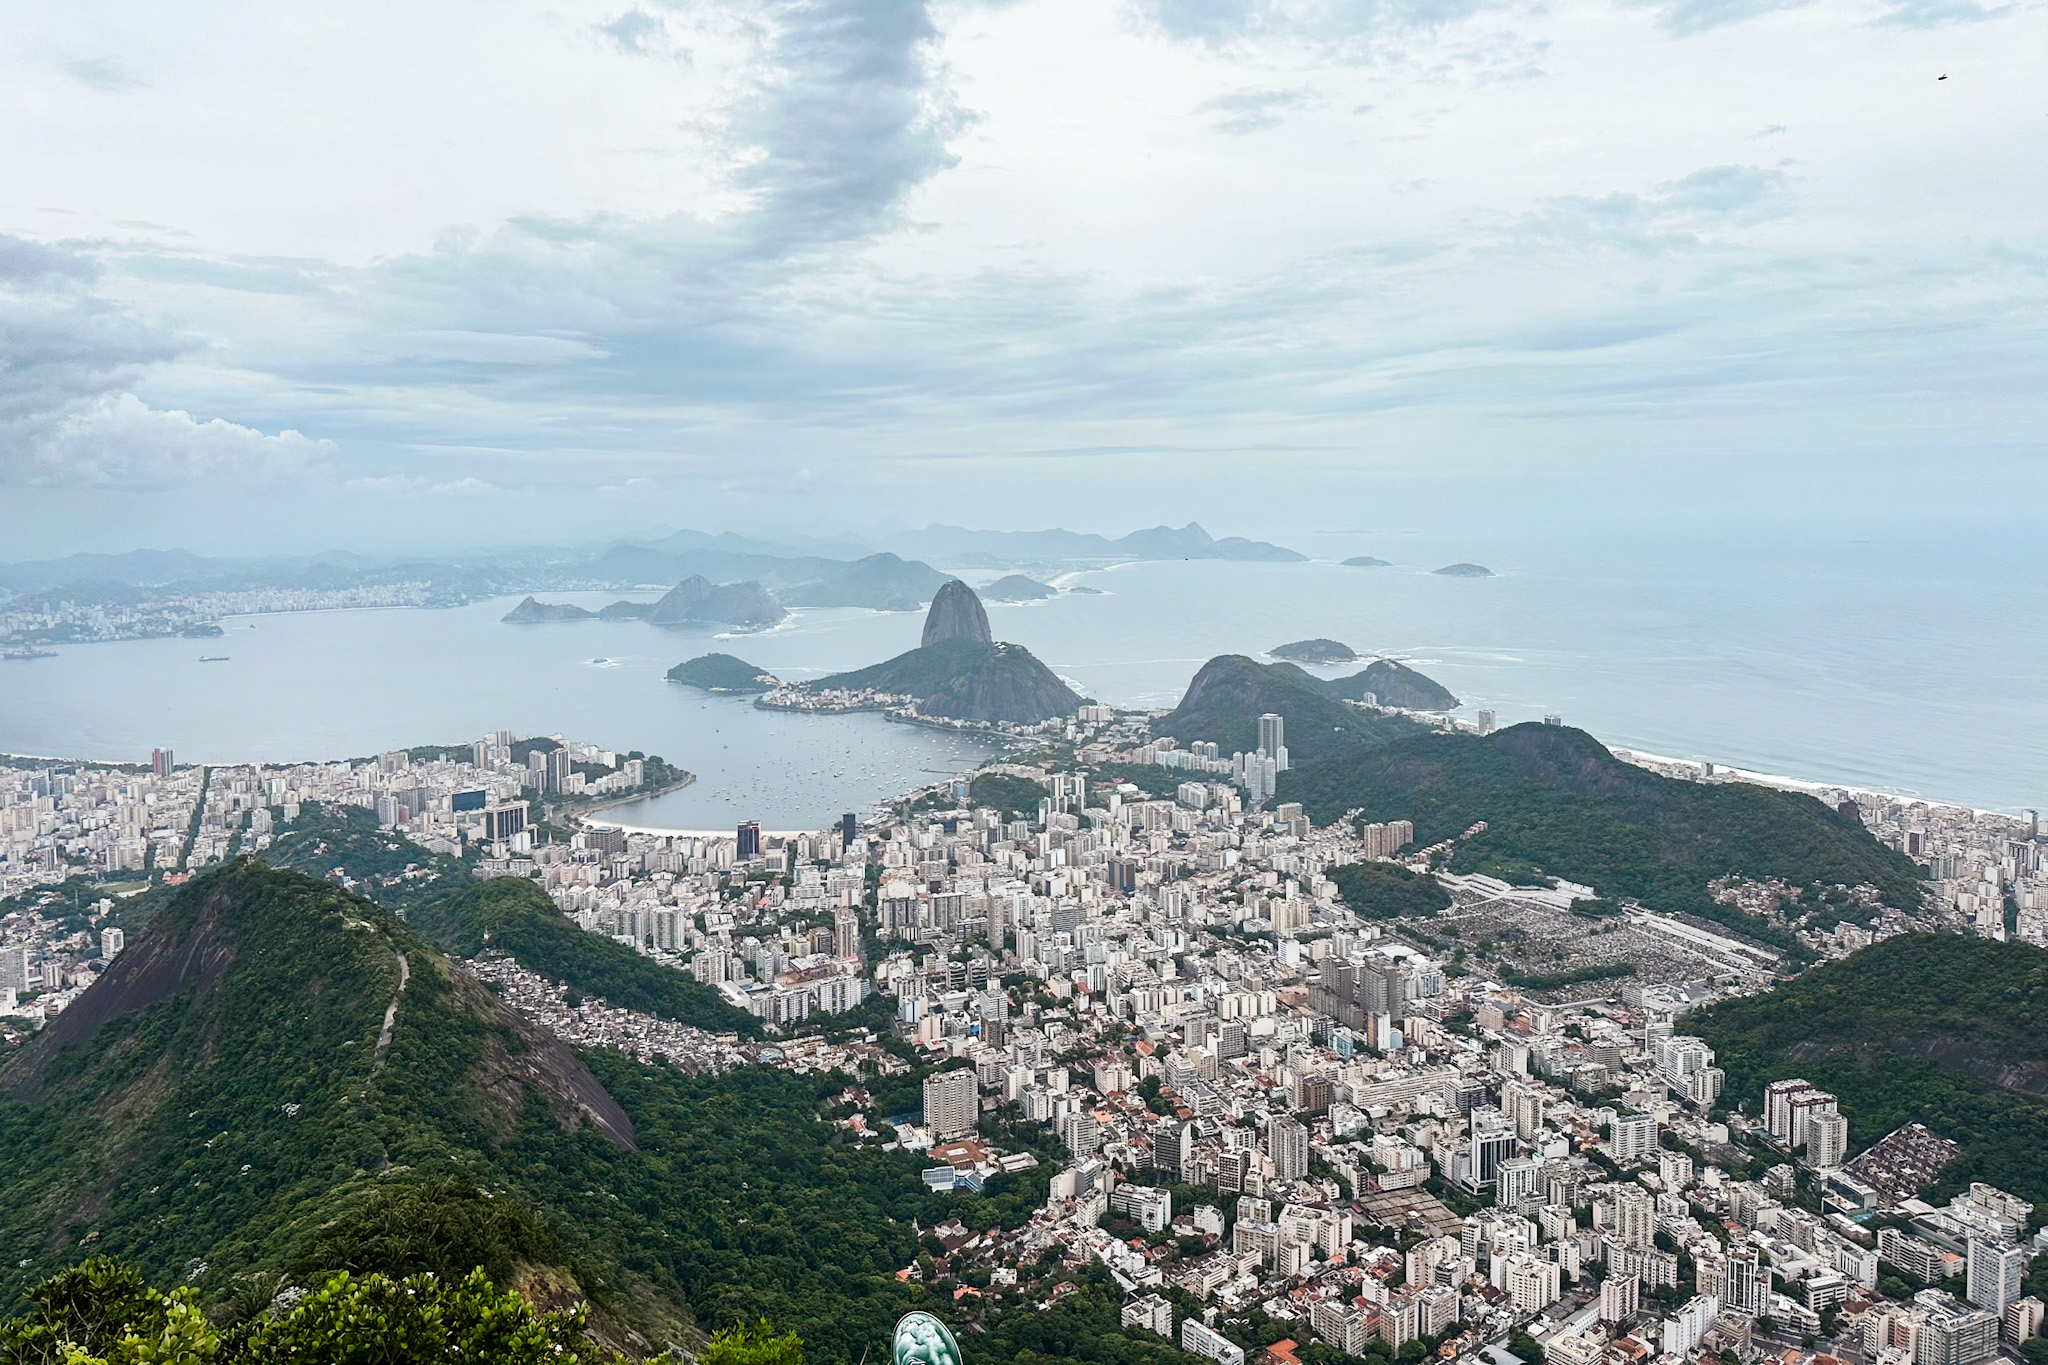 Rio de Janeiro Travel Guide: Views over Rio from the Christ the Redeemer viewpoint